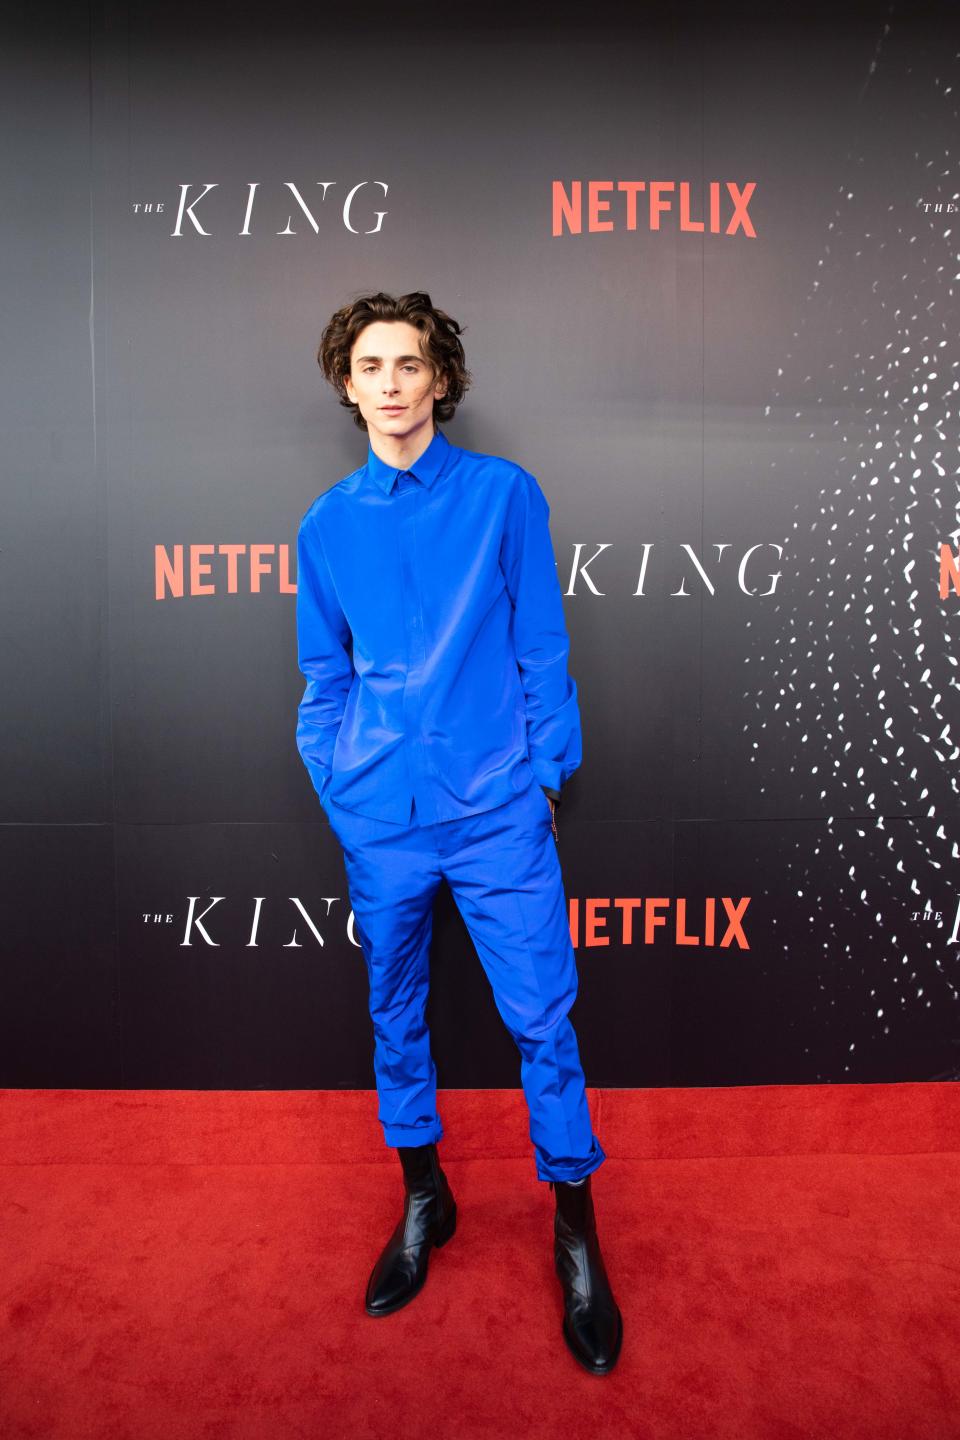 A photo of Timotheé Chalamet wearing a blue shirt and pants at The King Sydney premiere.